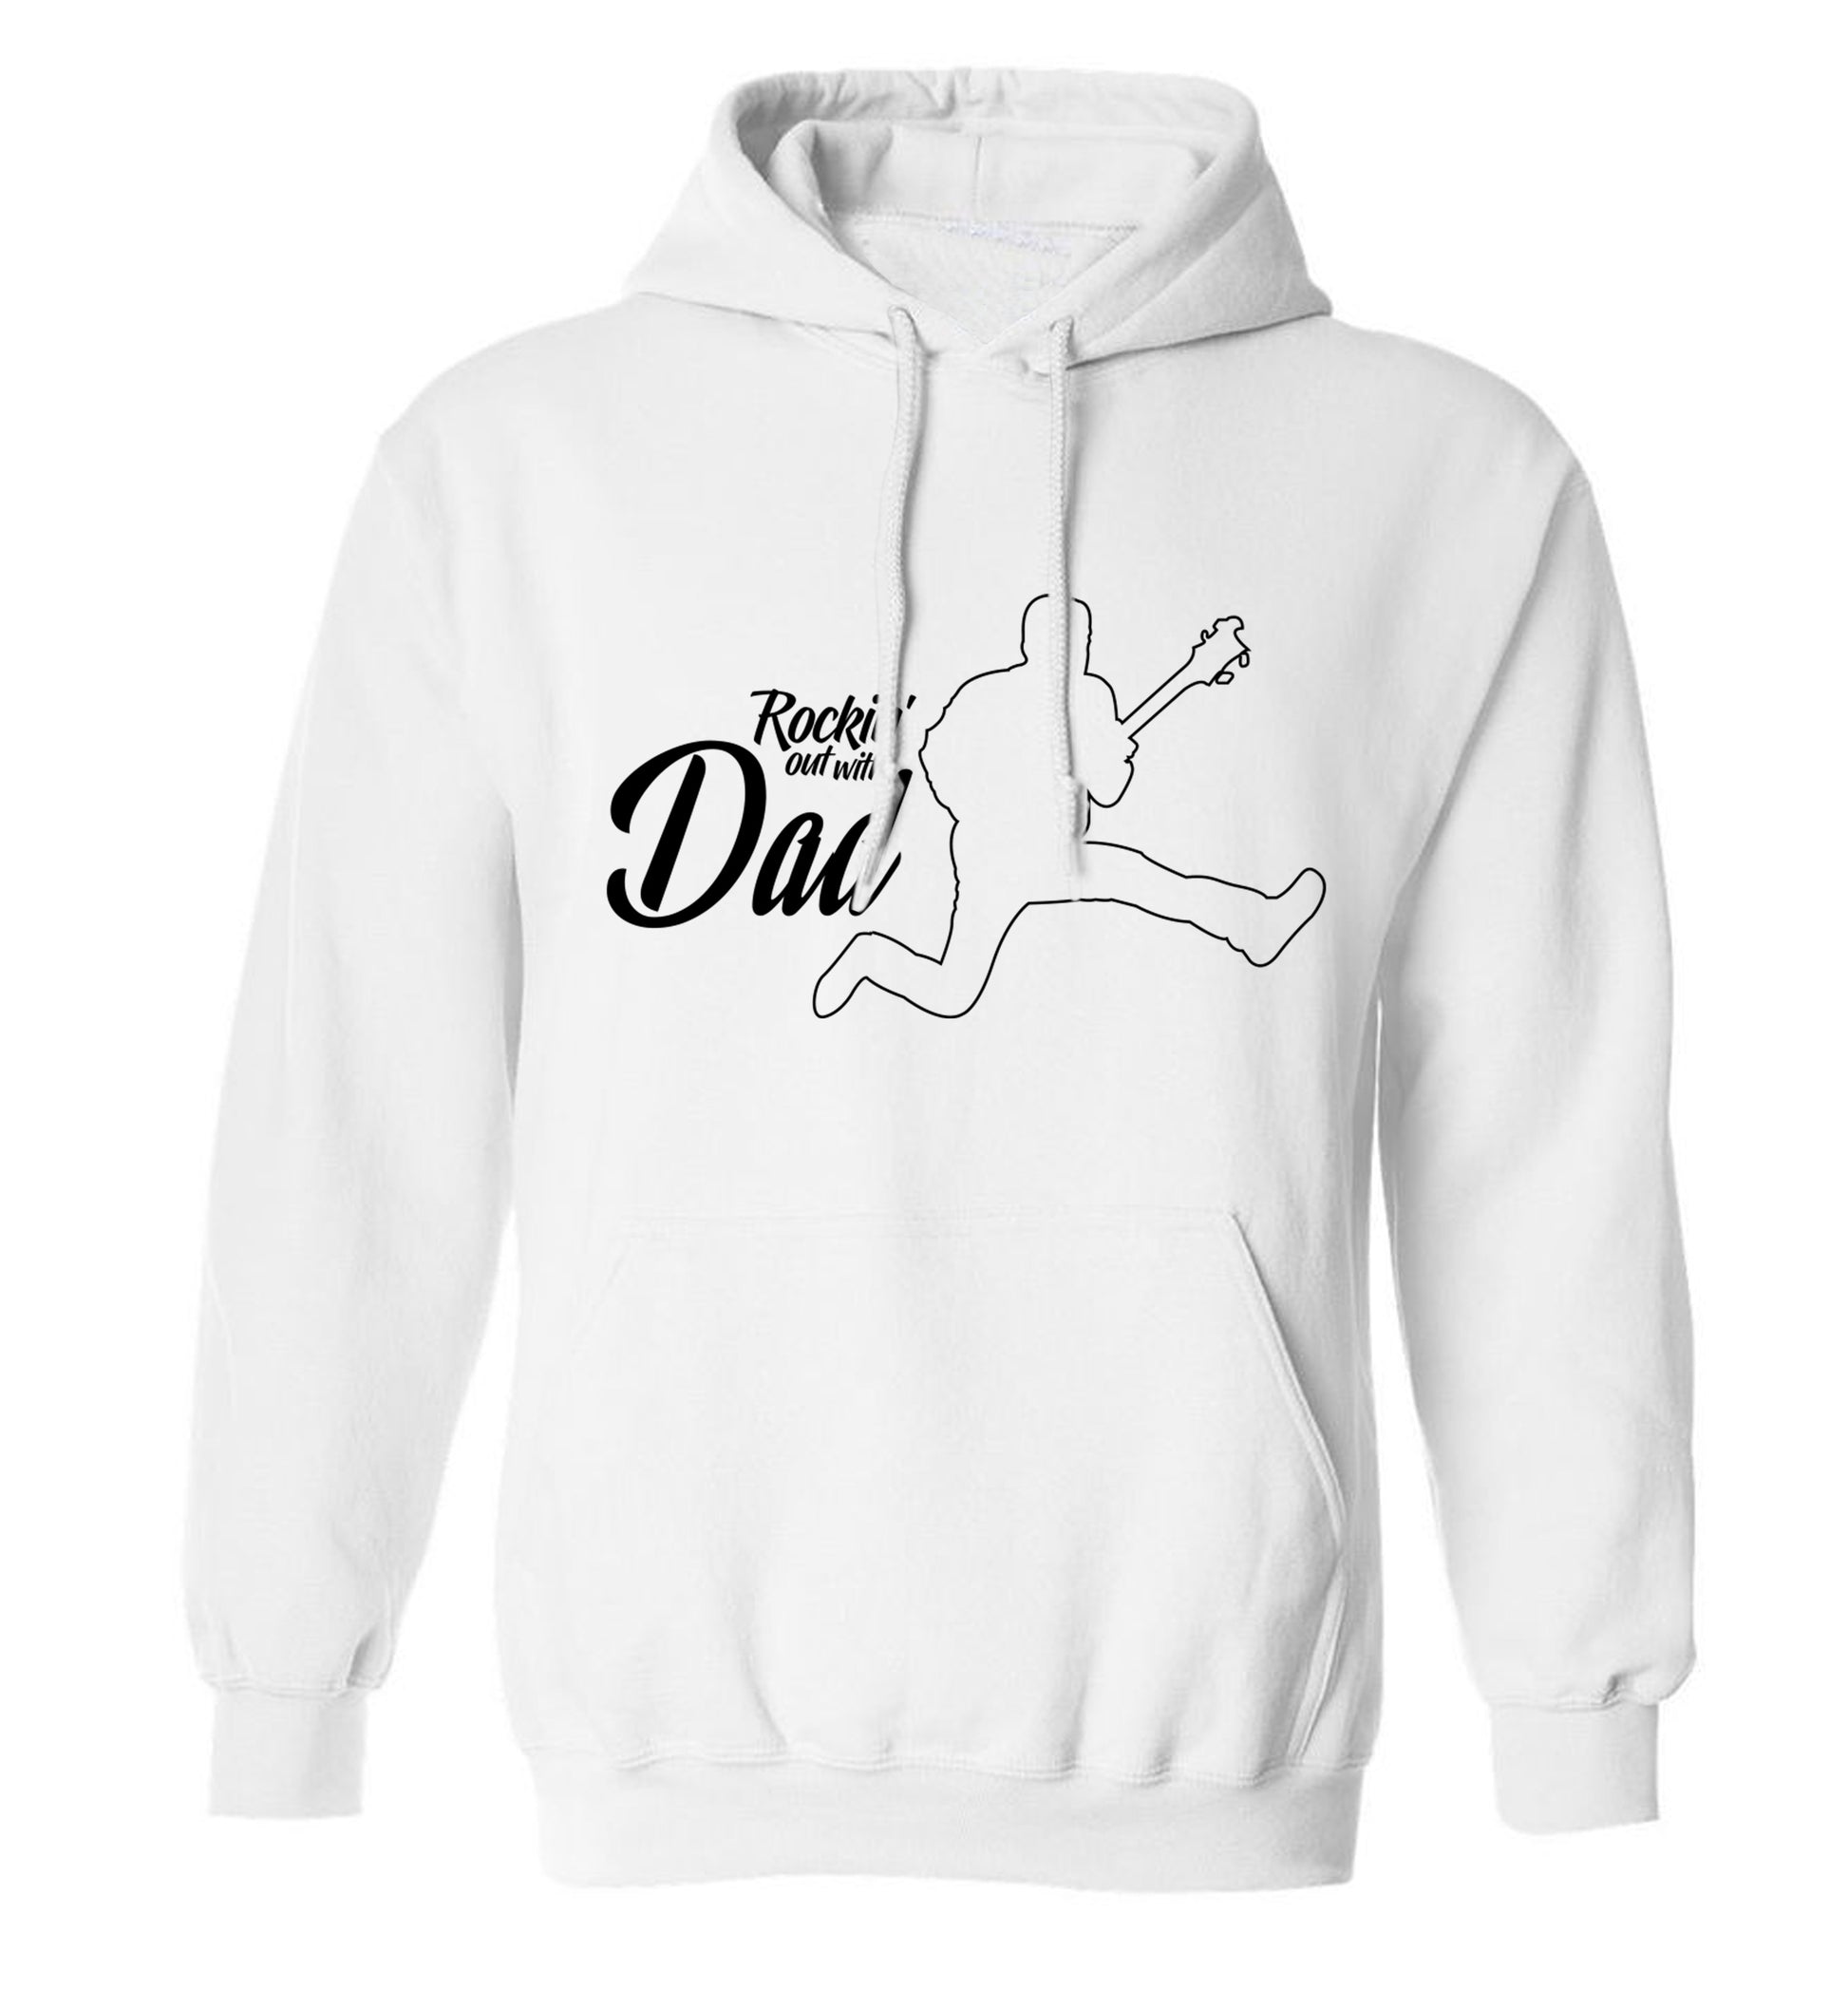 Rockin out with dad adults unisex white hoodie 2XL